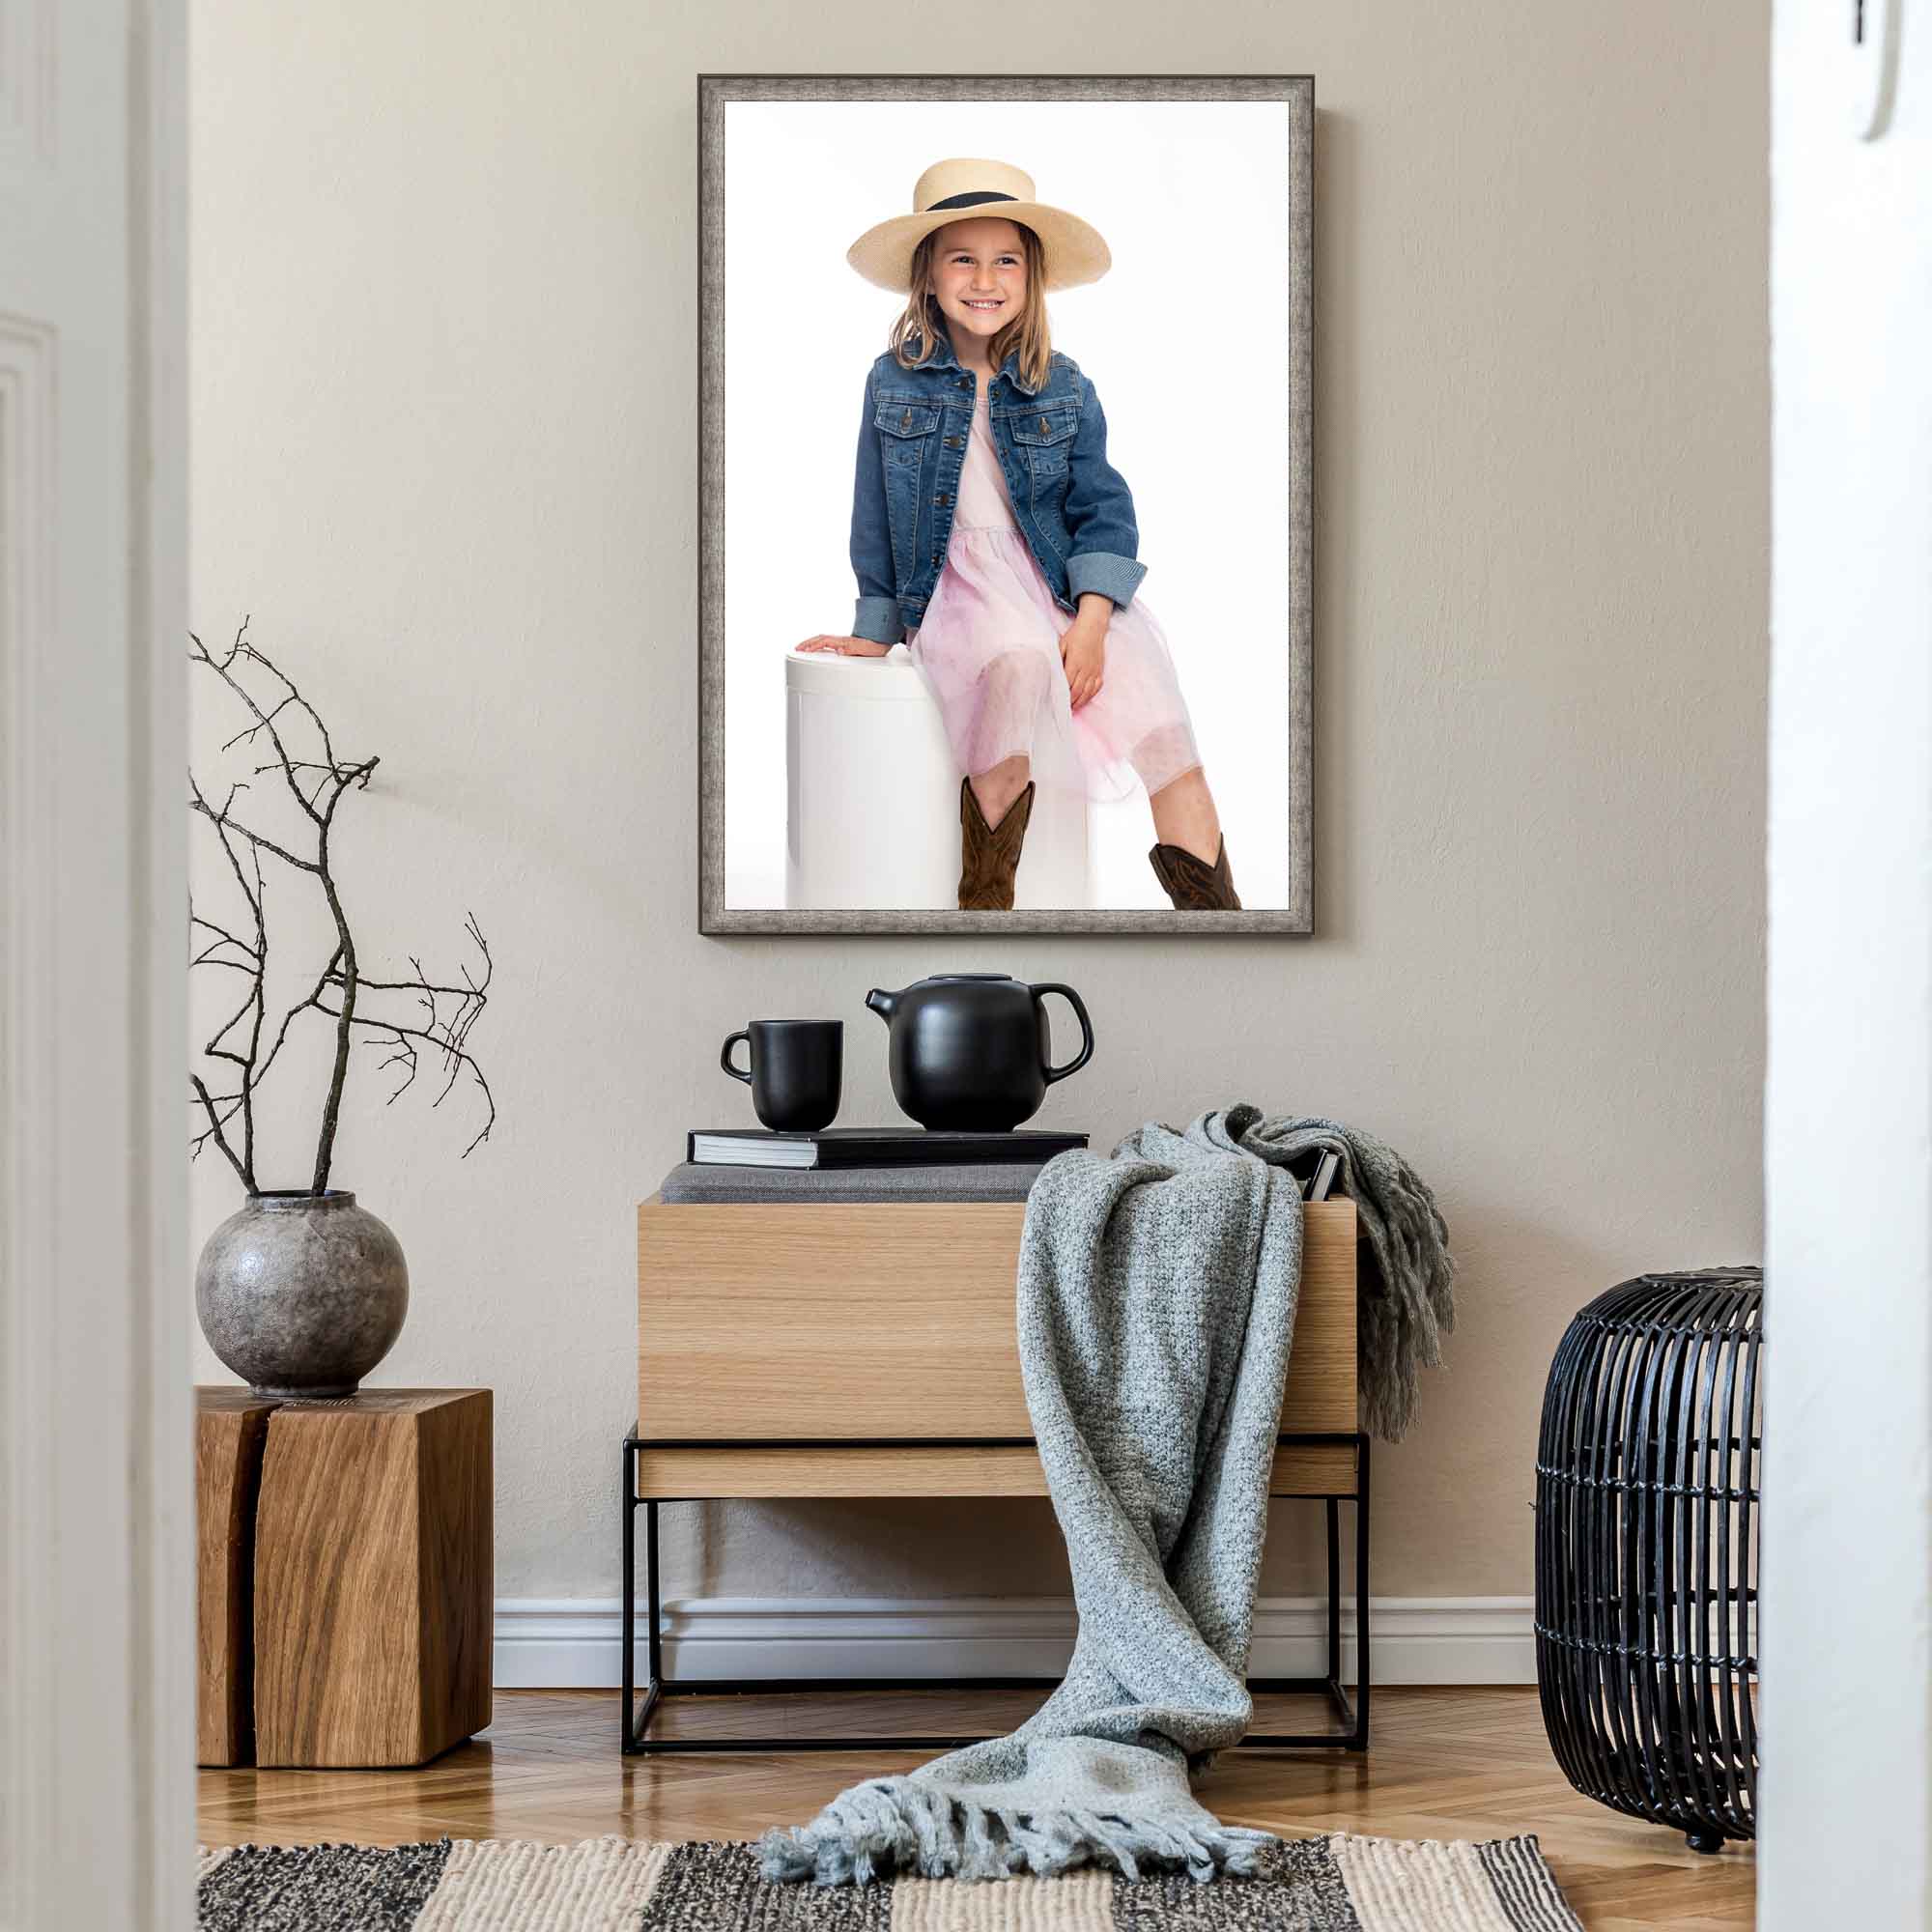 Contemporary Style Portrait in Home | Lisa Maco Photography, Washington, DC Family Photograher